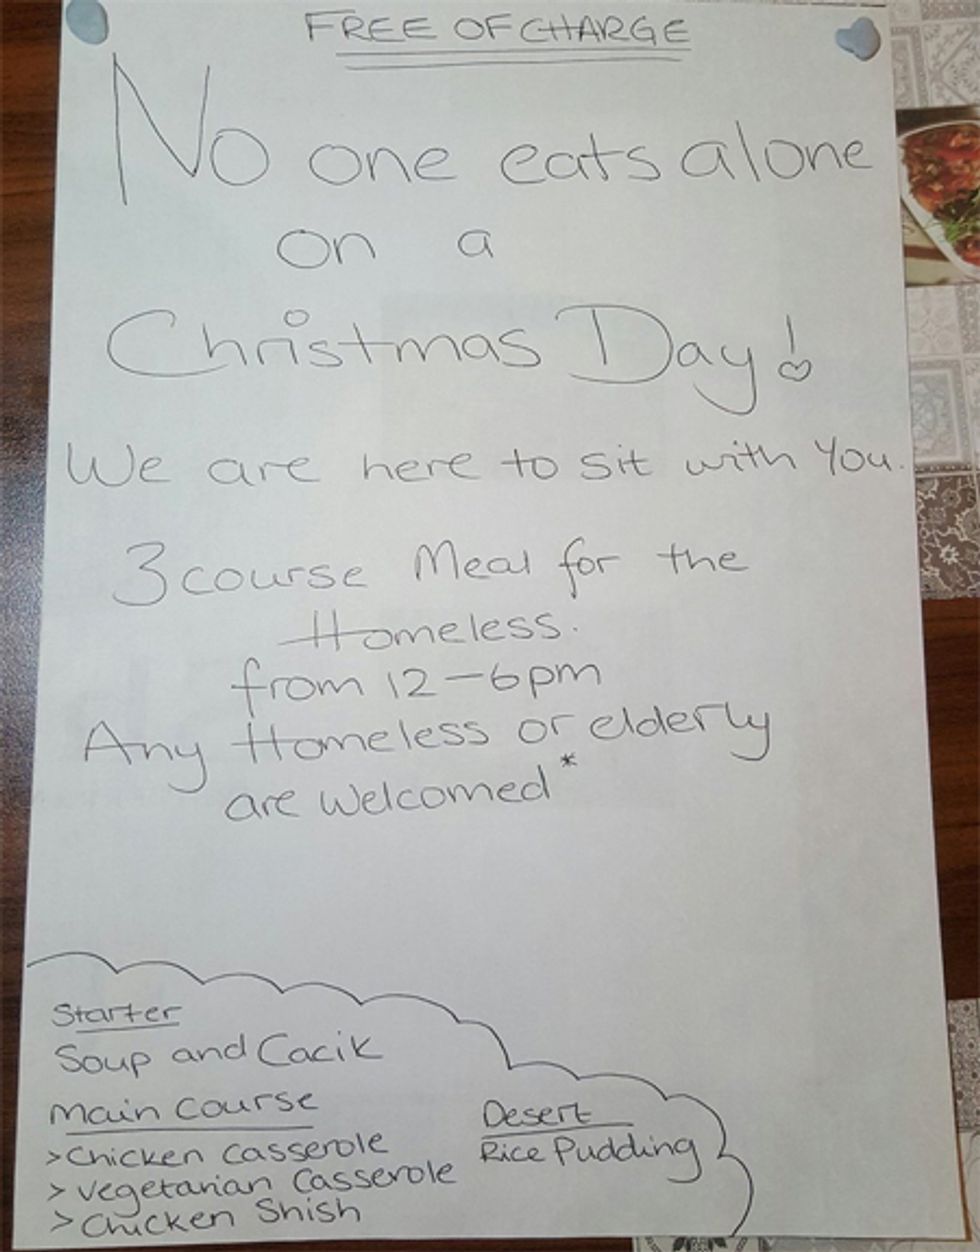 Muslim Restaurant Declares War On Christmas By Offering Free Meals To Homeless, Elderly. What Are They Up To????